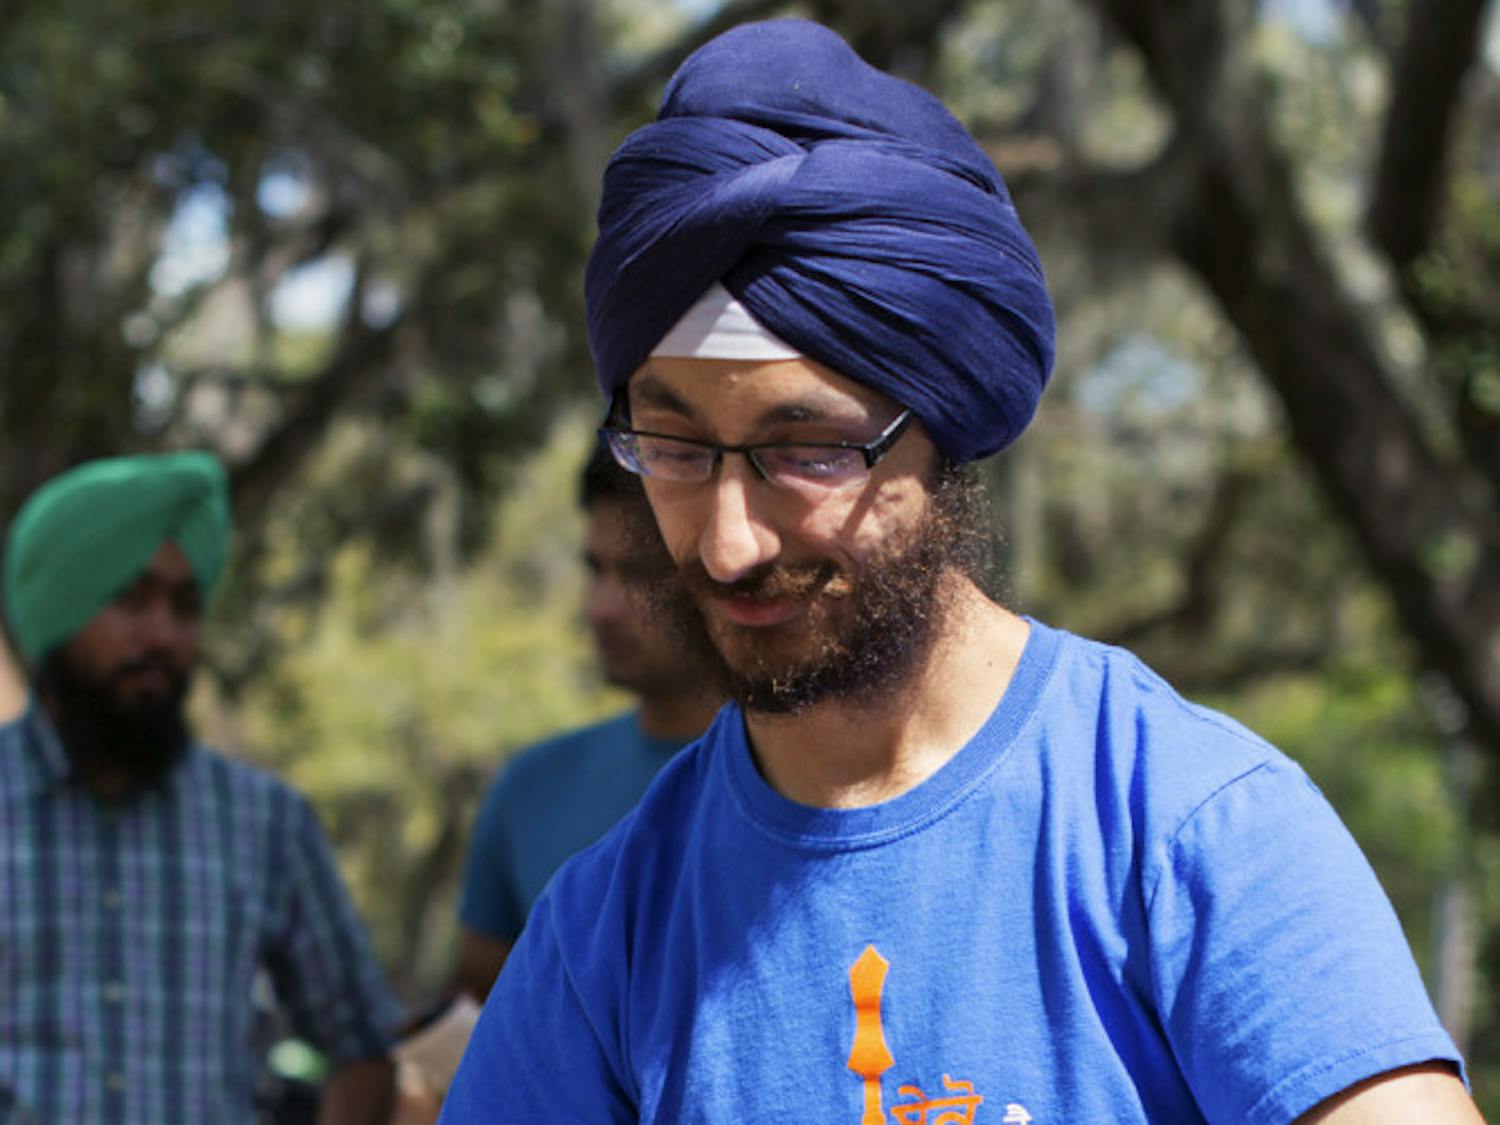 Neal Singh, 24, a second-year dental student wraps Narayan Kulkarni's head in a Sikh turban as part of the Sikh Students Association bi-annual Turban Day.